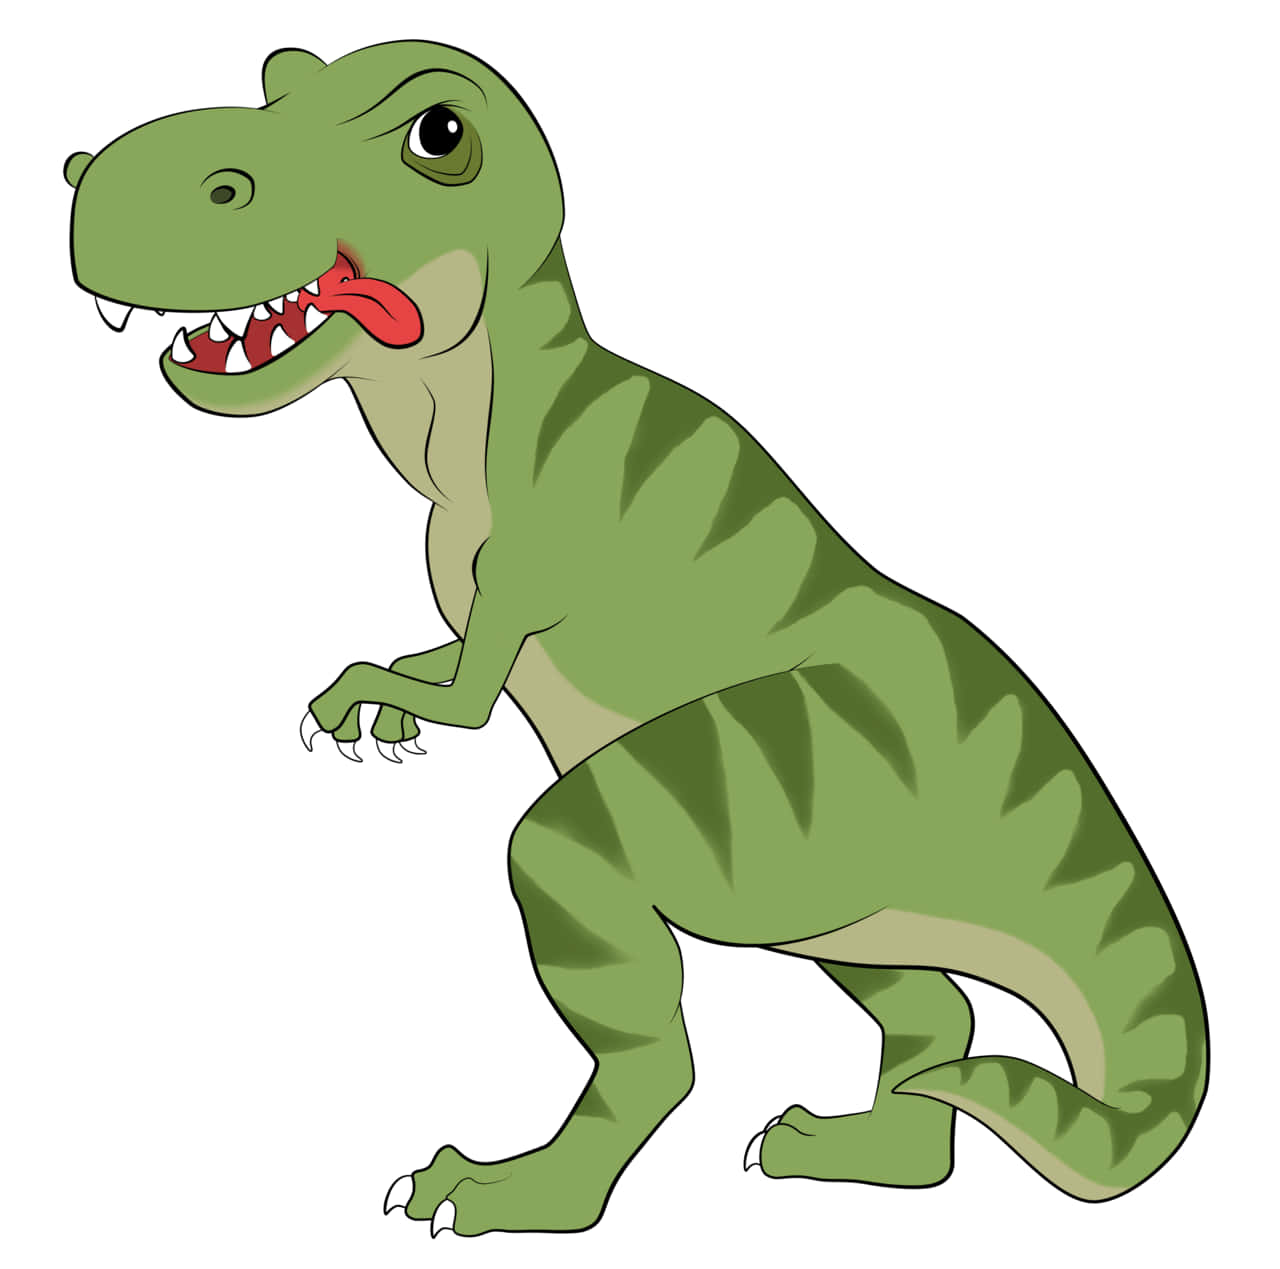 A colorful drawing of a Tyrannosaurus Rex